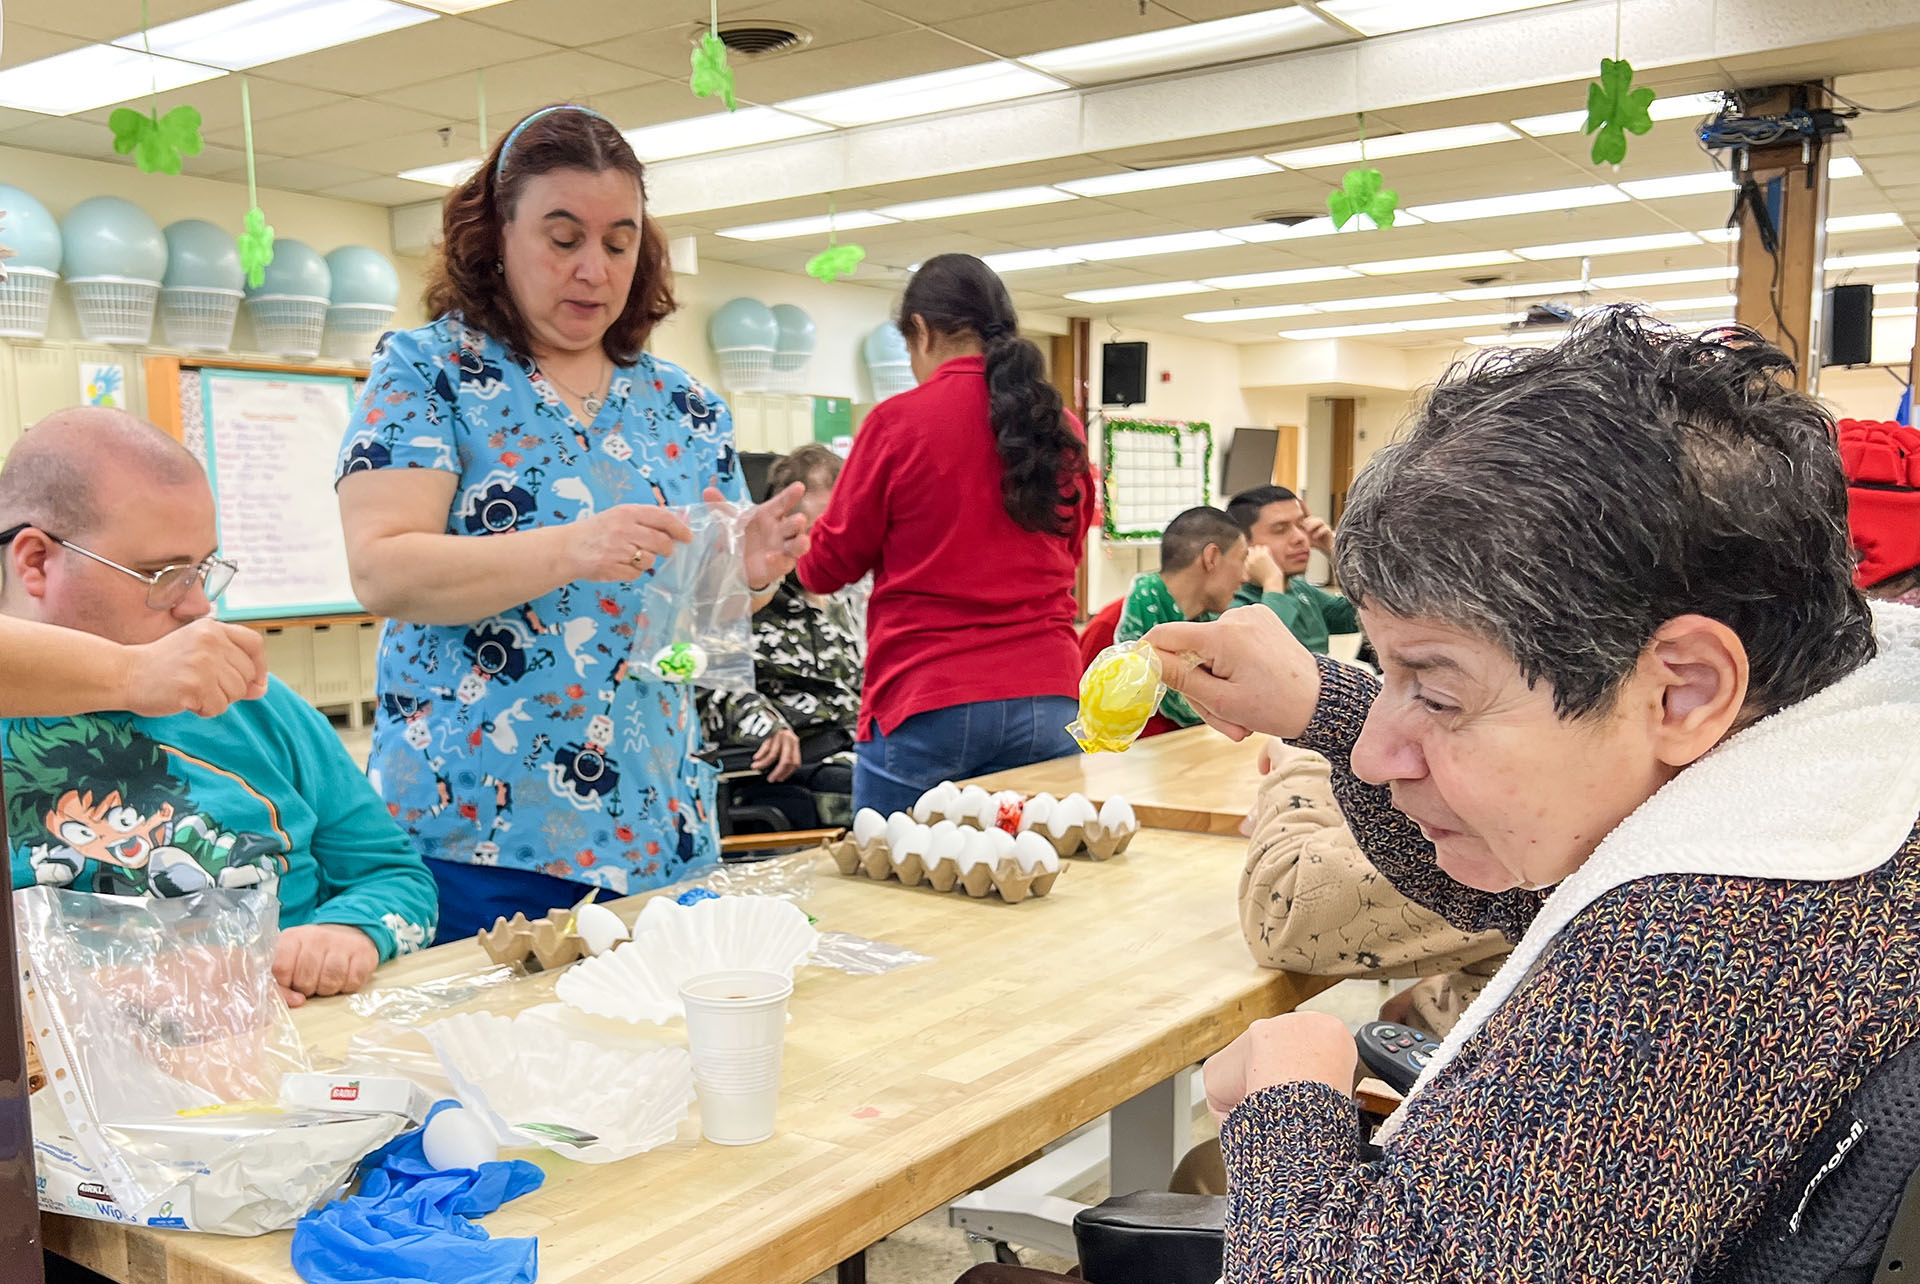 NJEDDA Adult Training Center participants working on Easter Egg dying activity